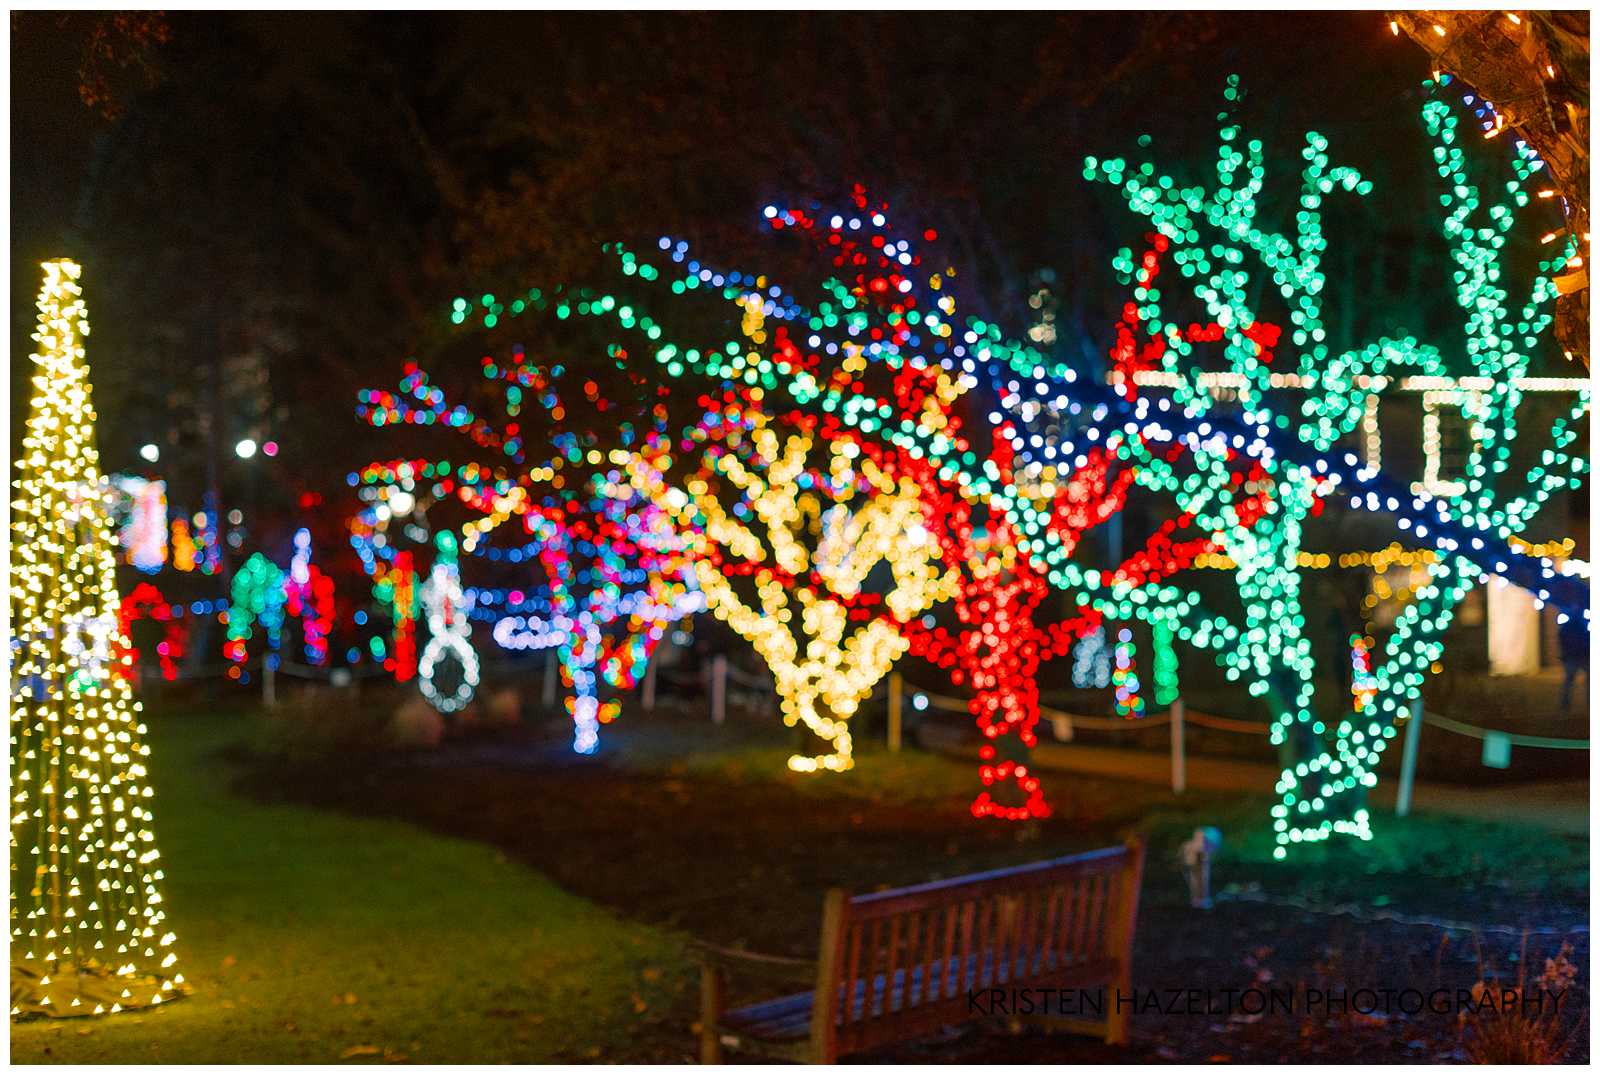 Night time photo of the Lilacia Park Lights display in December. Tree trunks are wrapped in brightly colored holiday lights.